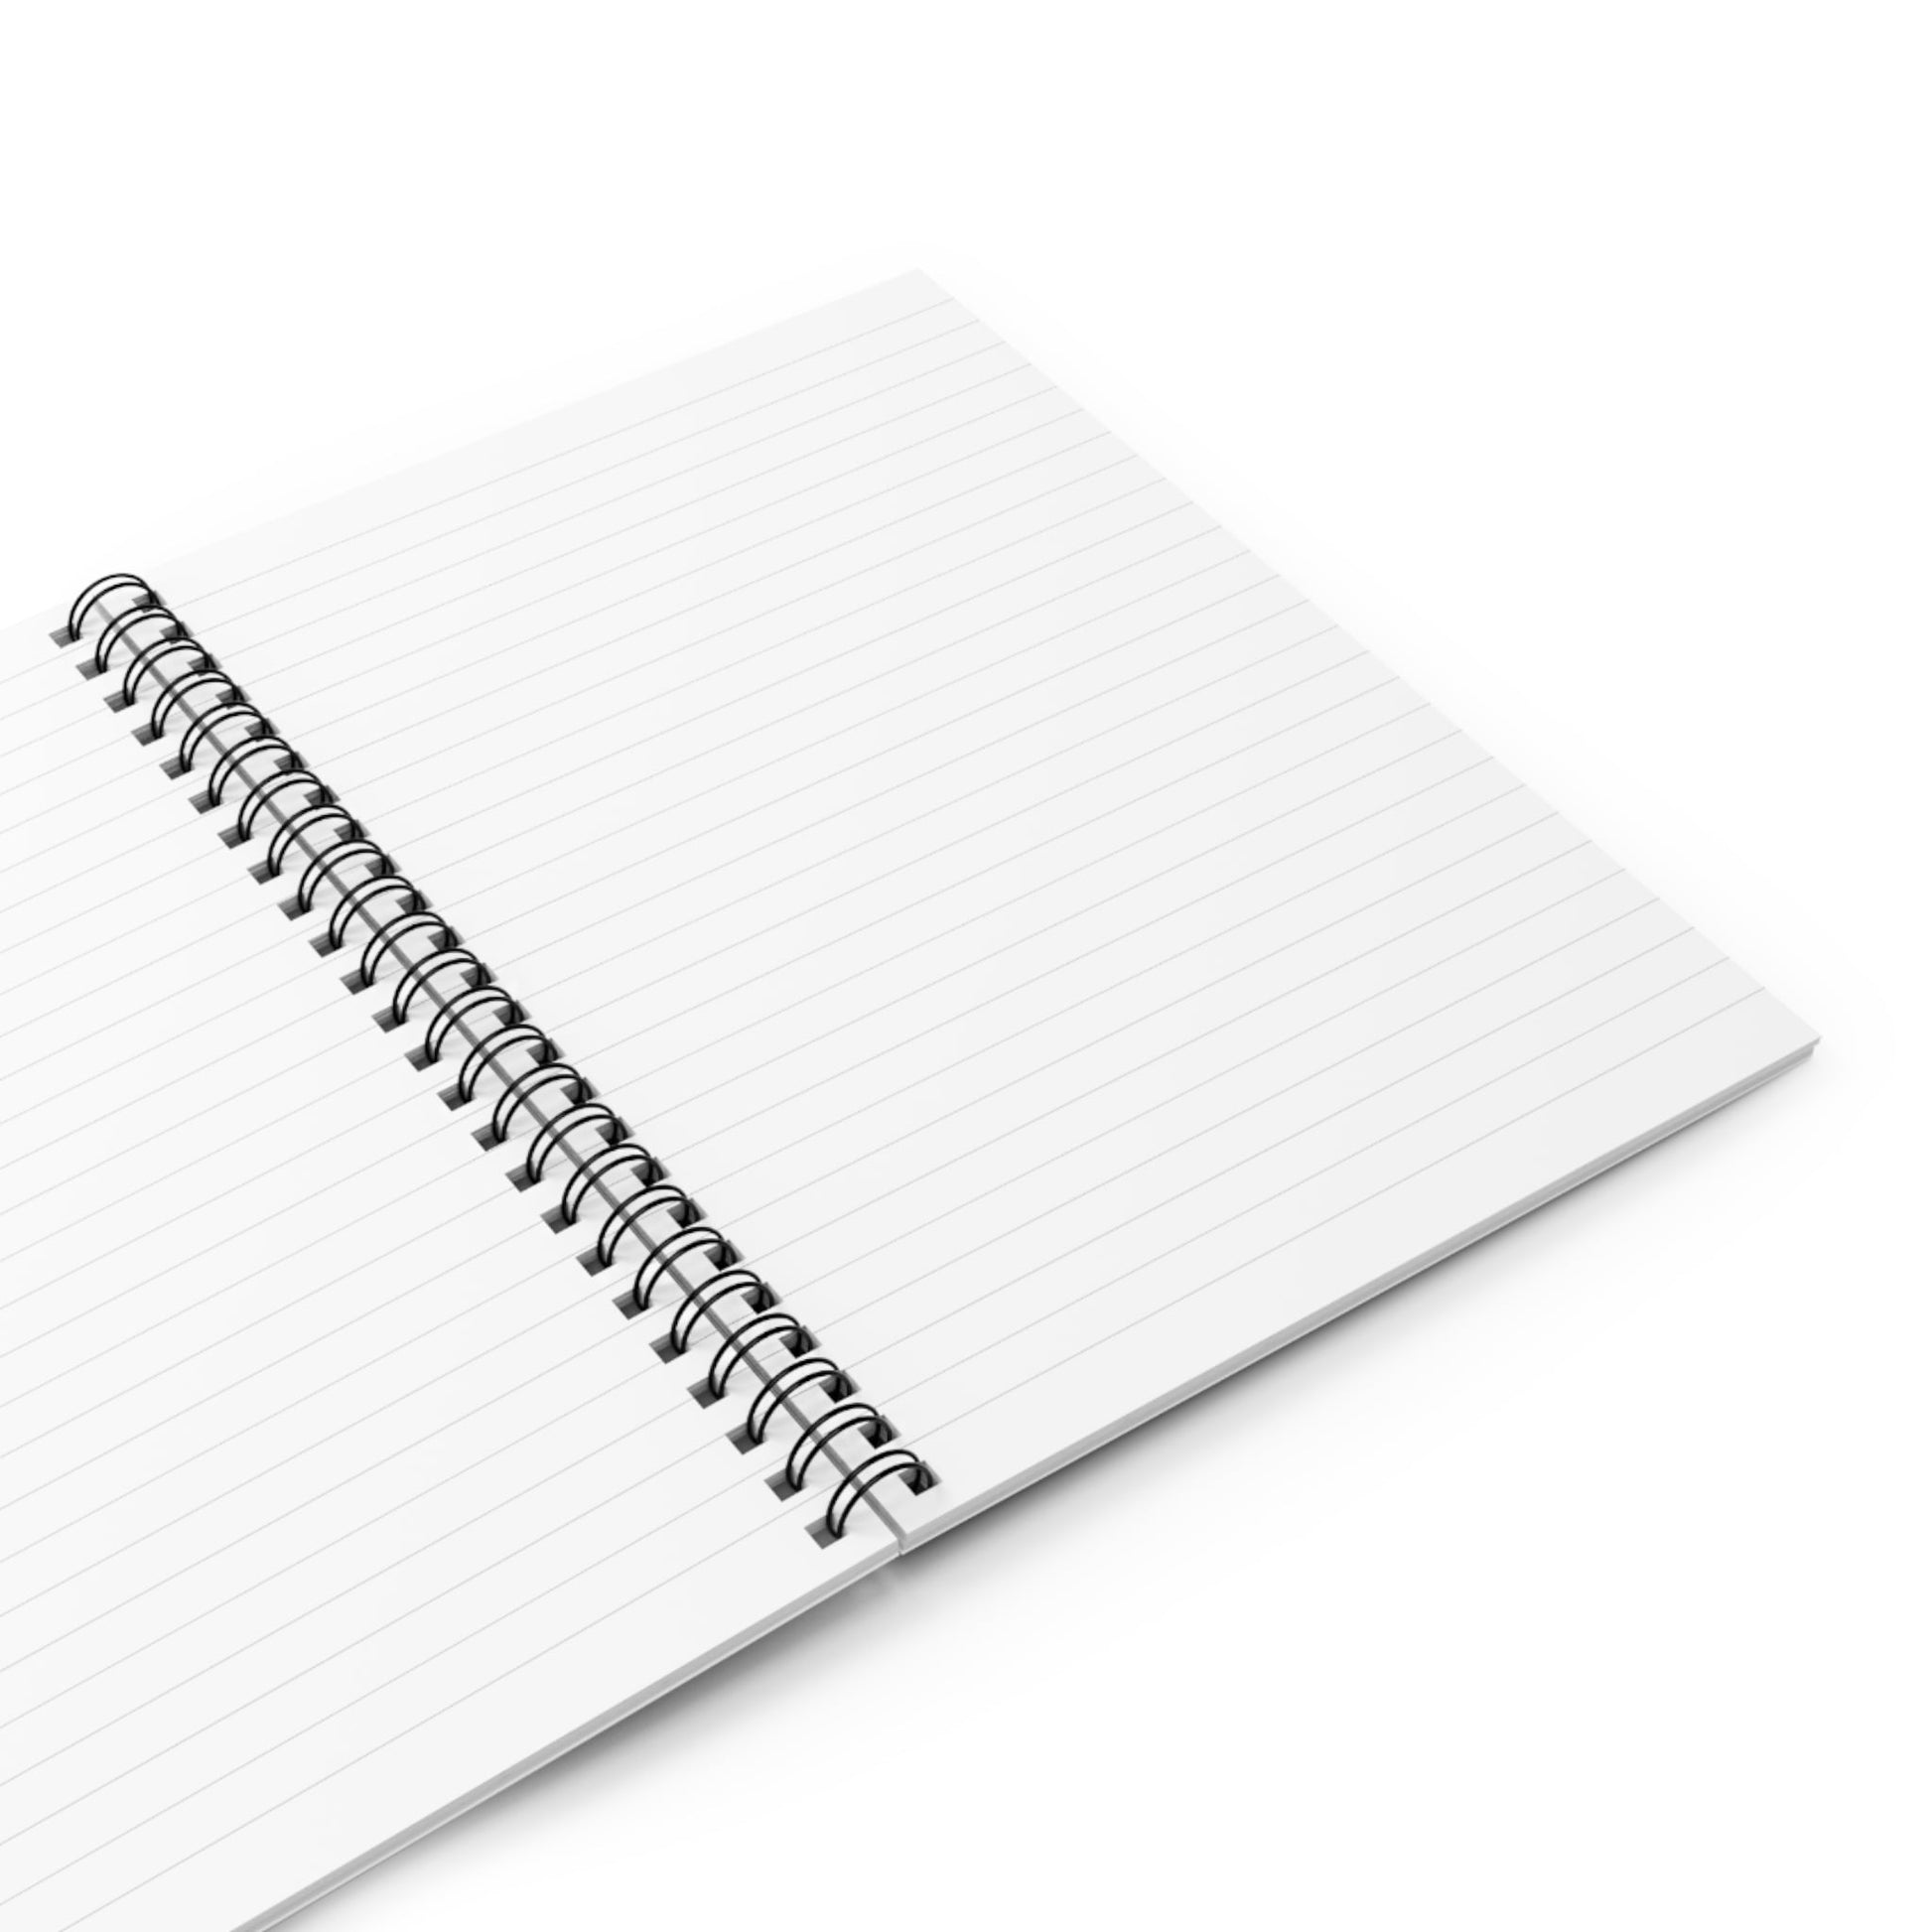 Spiral Notebook with Yosemite National Park Cover Opened with Blank White College Ruled Pages